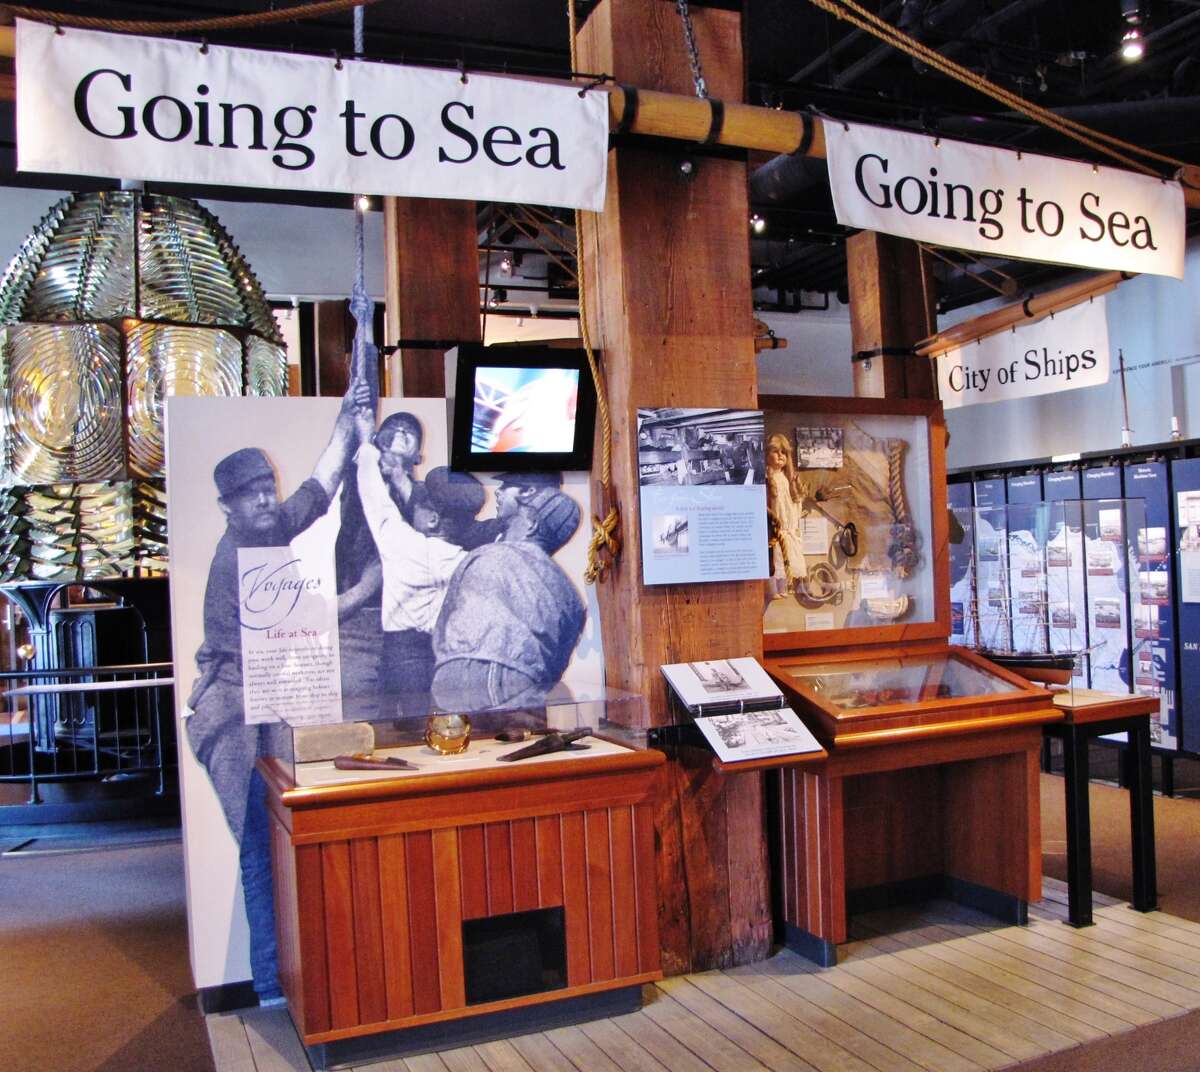 An exhibit at the San Francisco Maritime Museum represents six of the city’s shoreline areas.